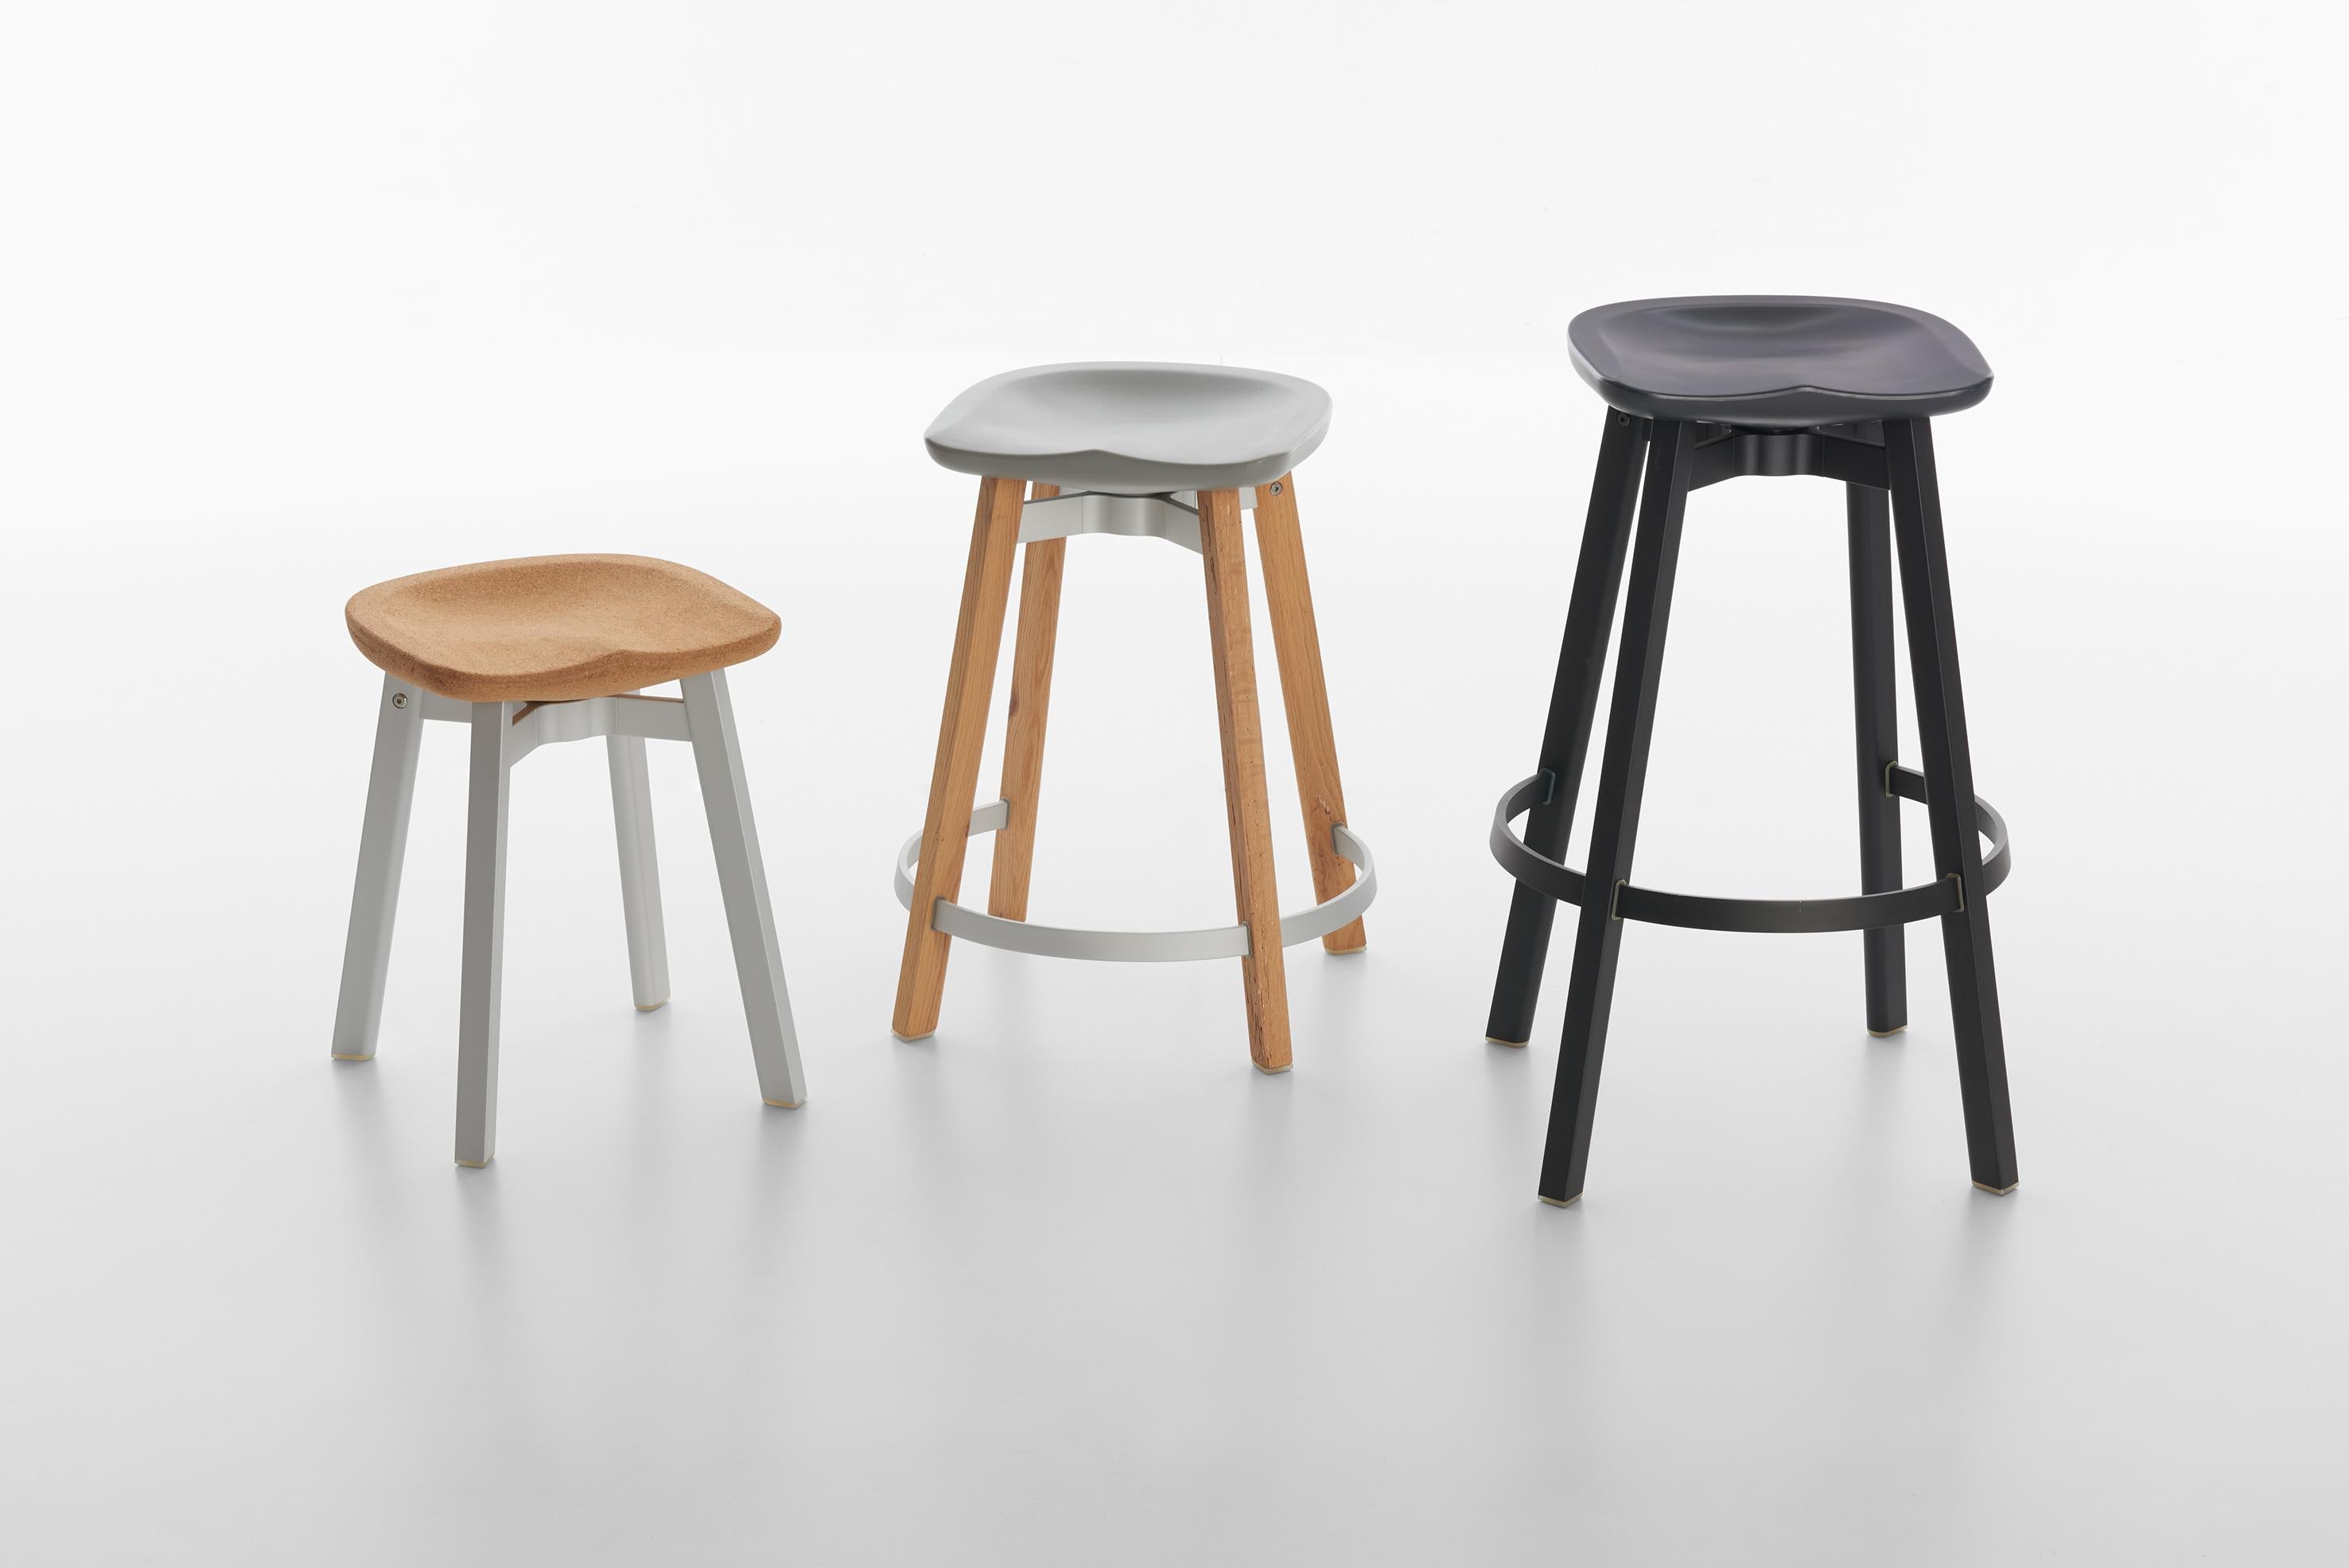 American Emeco Su Small Stool in Natural Aluminum with Flint Seat by Nendo